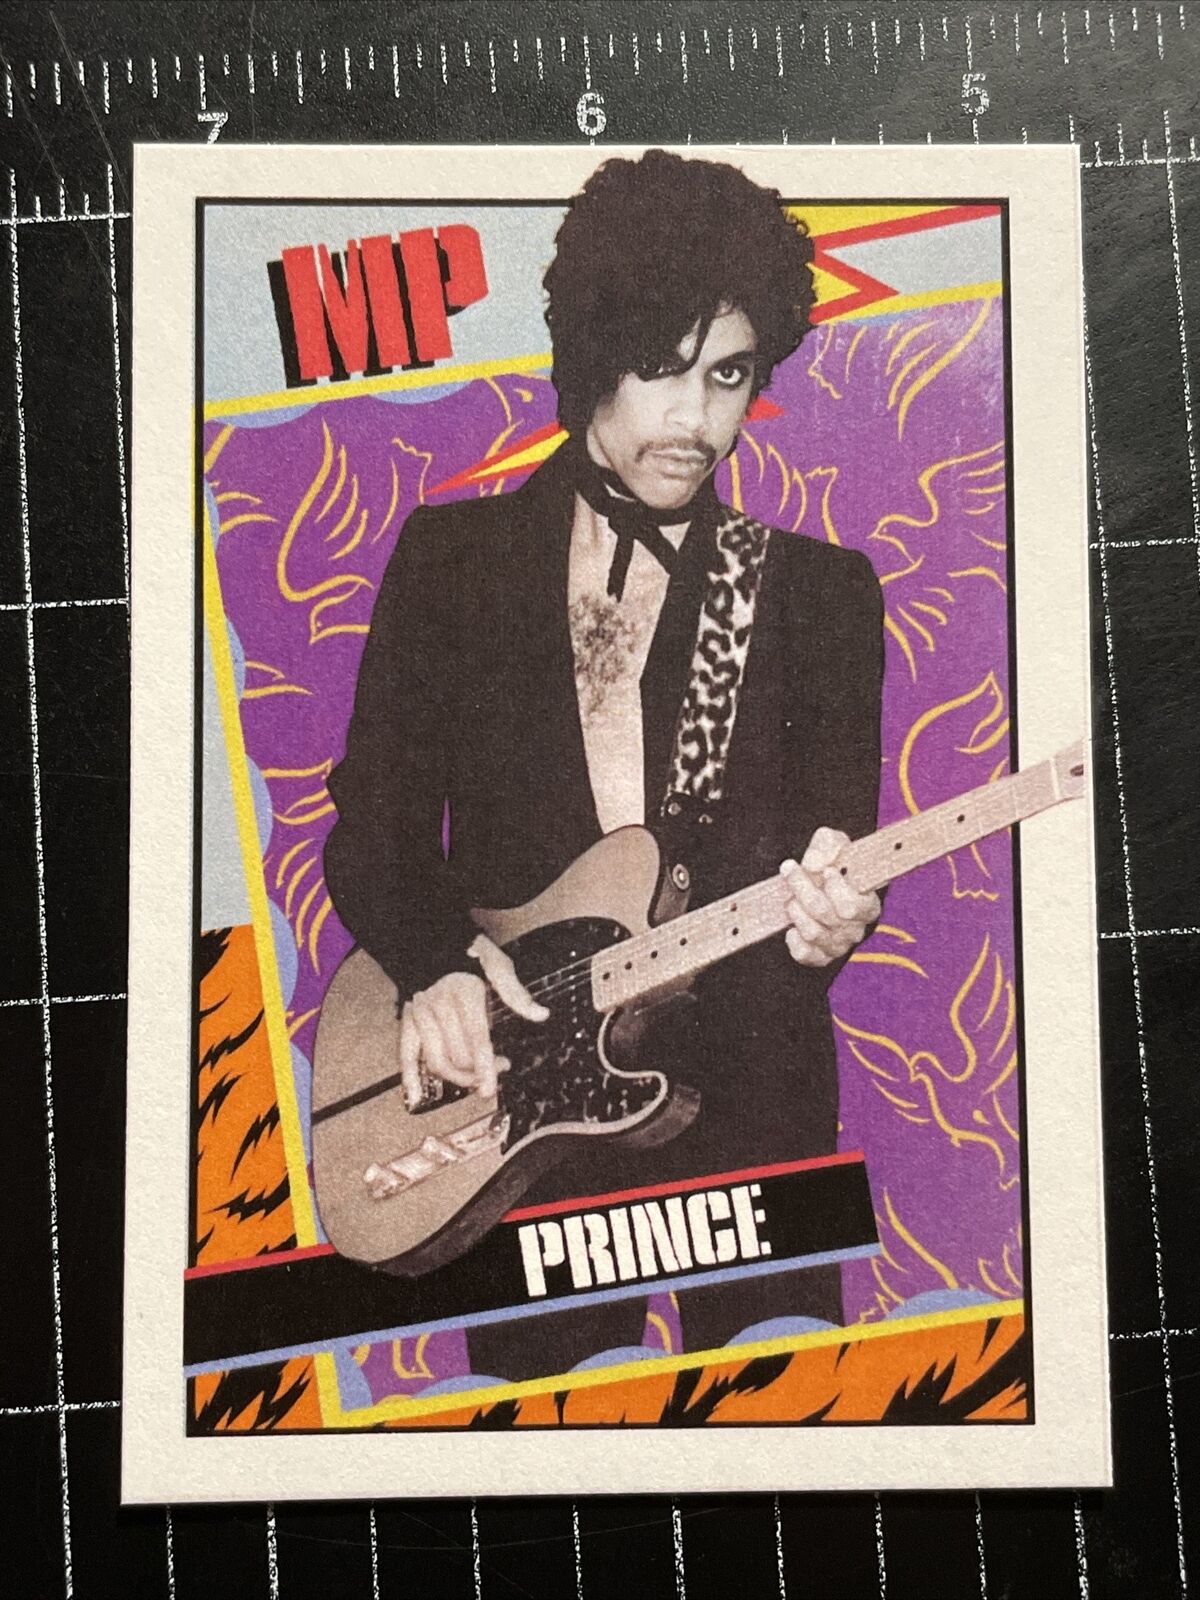 Prince Musician Custom 90s Style Trading Card By MPRINTS